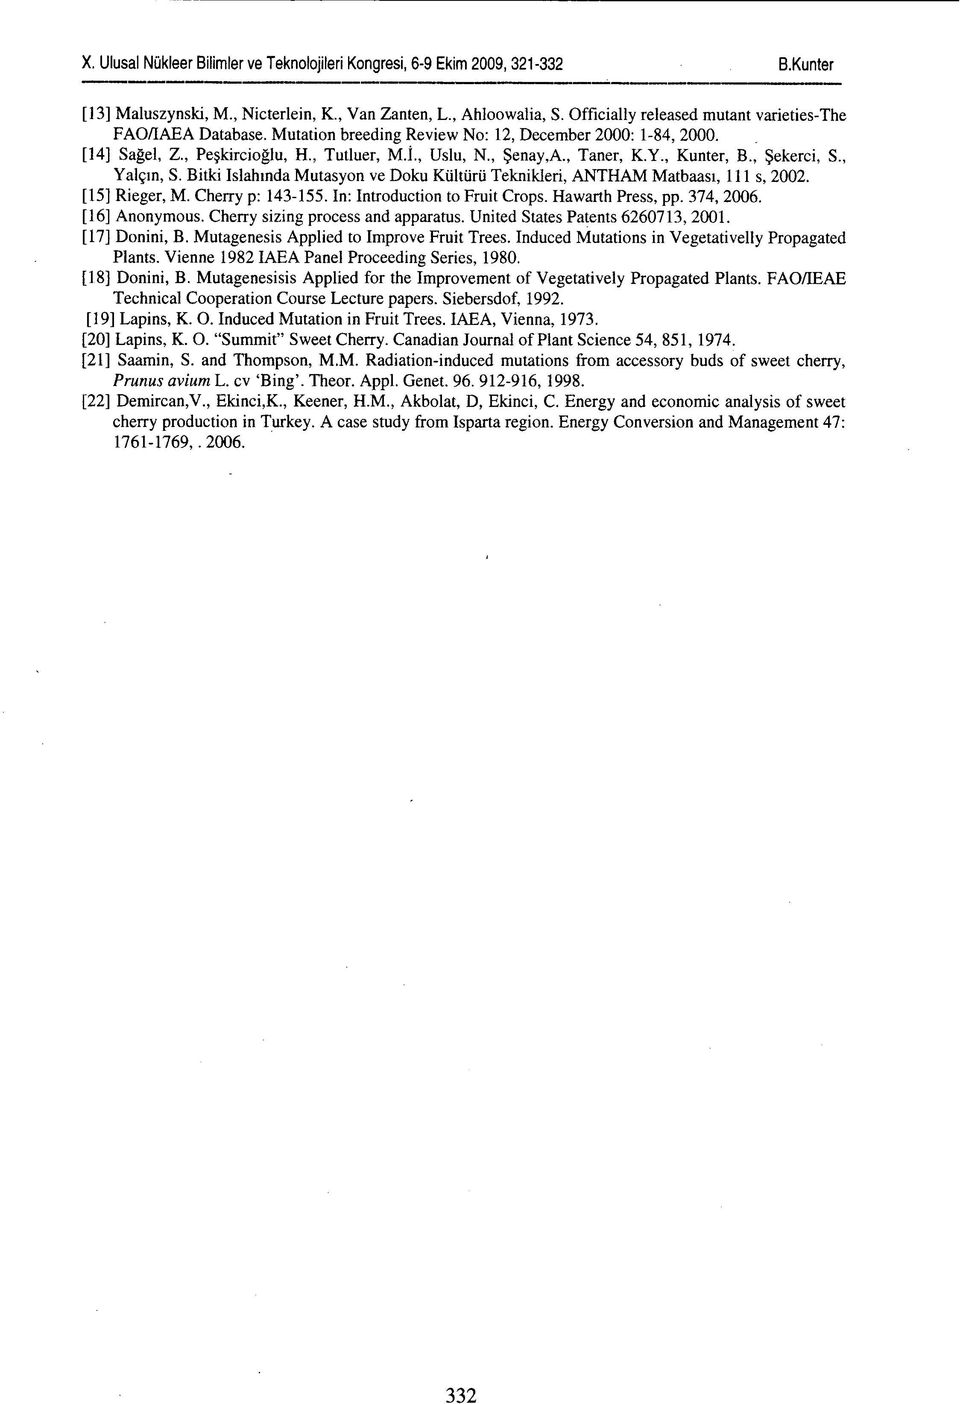 [15] Rieger, M. Cherry p: 143-155. In: Introduction to Fruit Crops. Hawarth Press, pp. 374, 2006. [16] Anonymous. Cherry sizing process and apparatus. United States Patents 6260713,2001.